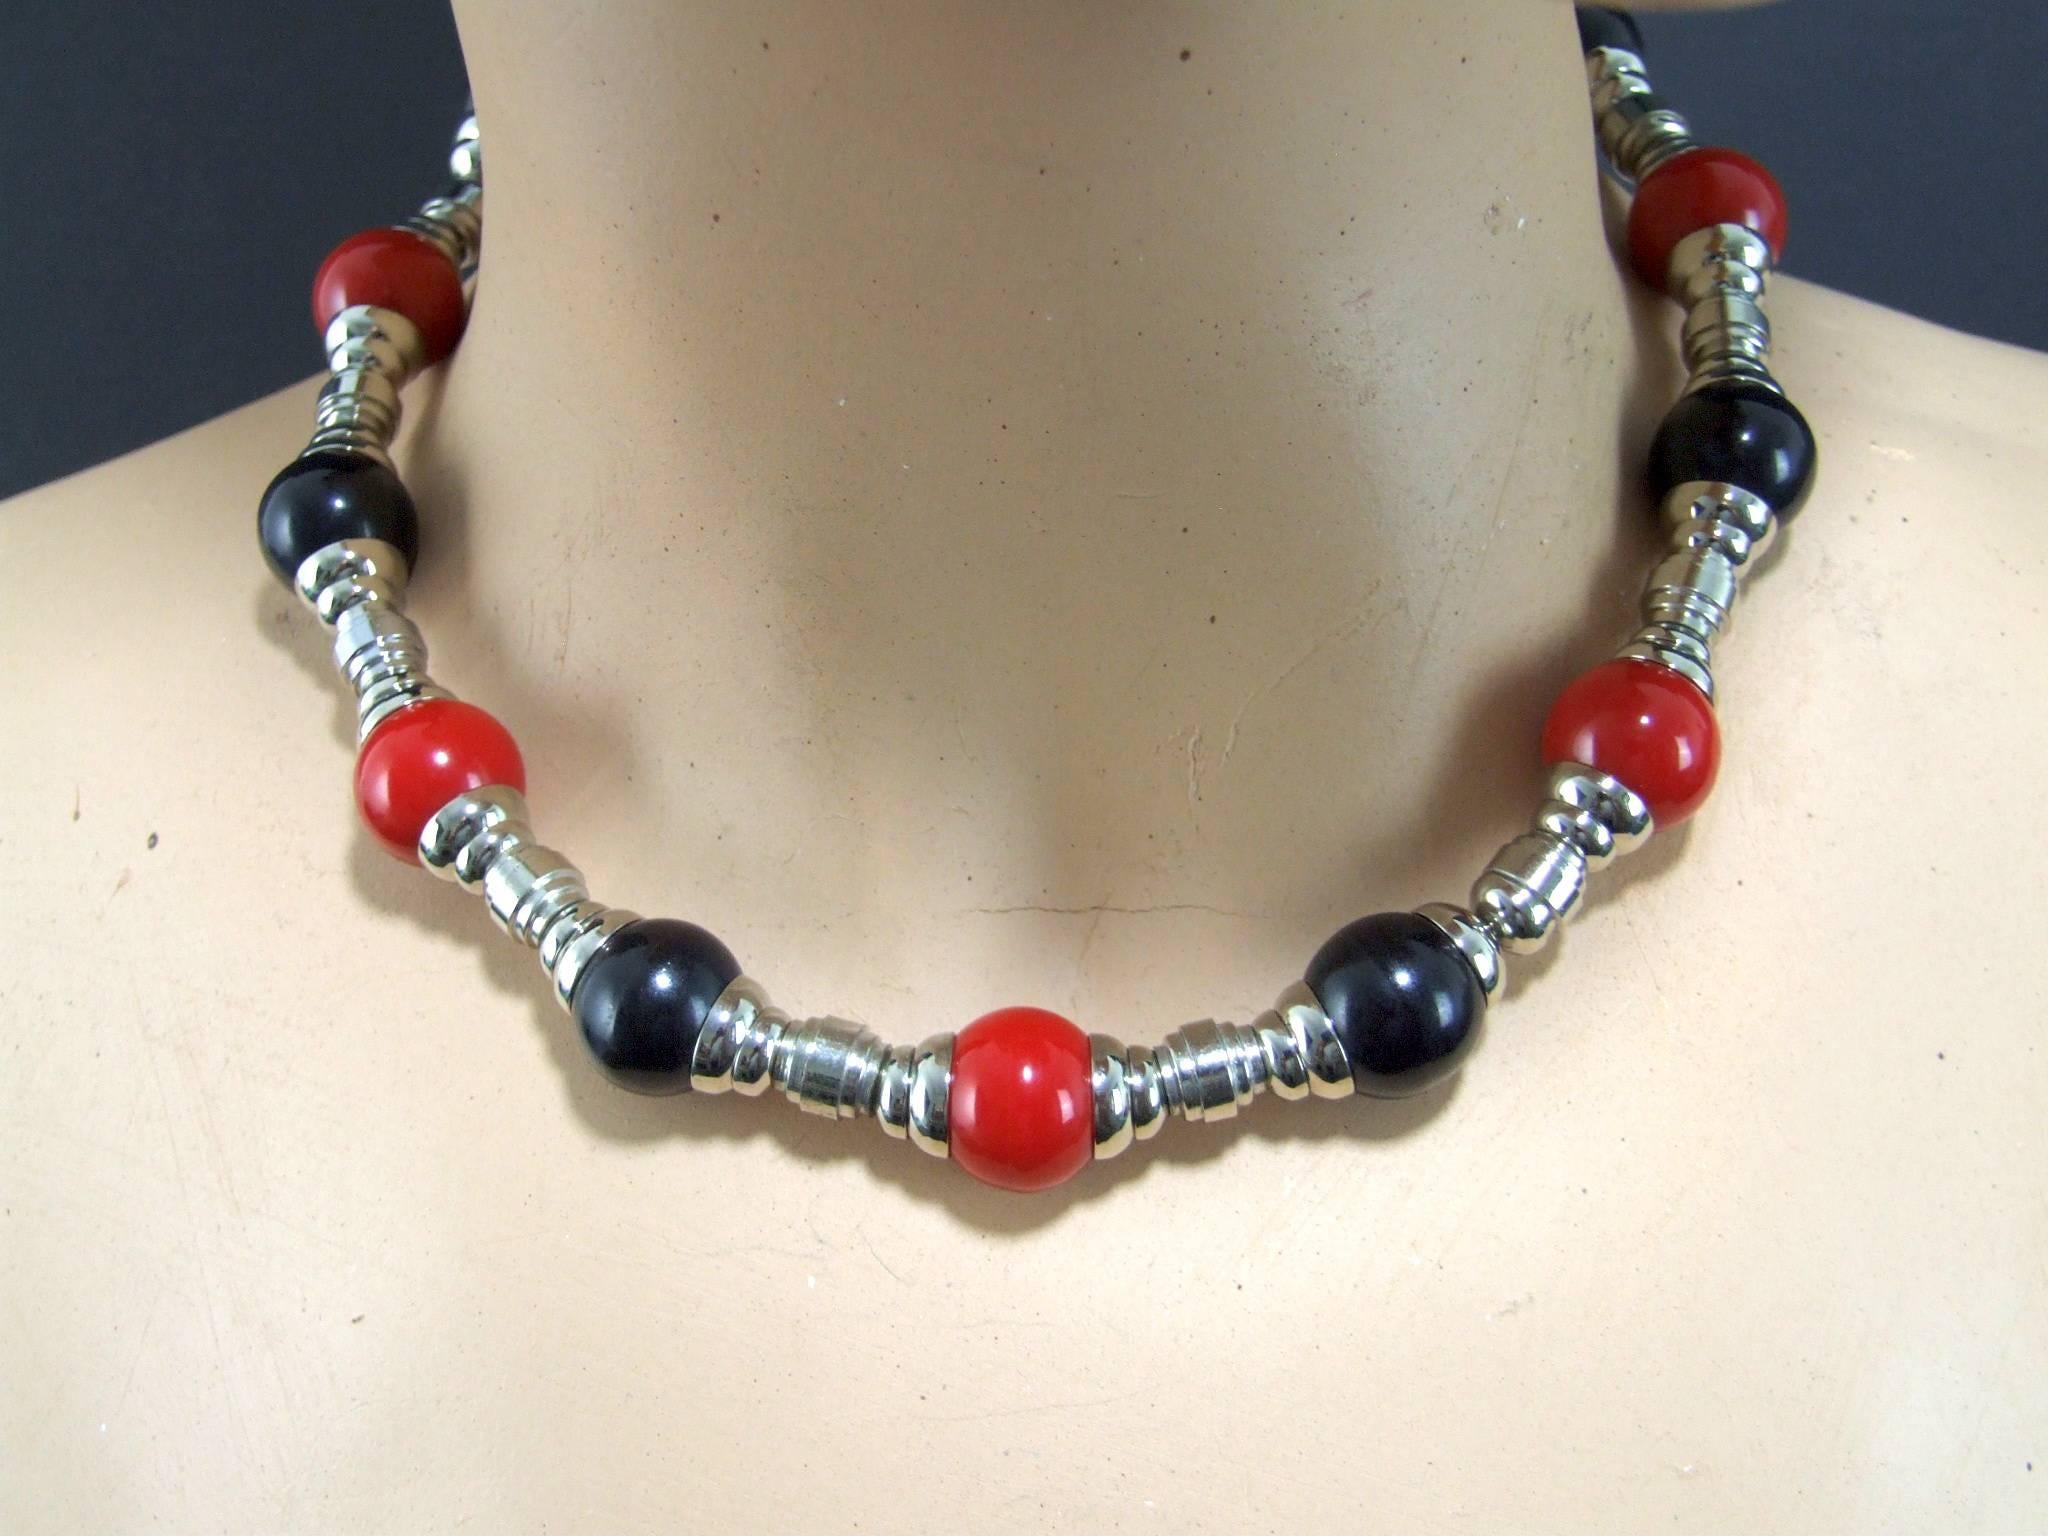 1930s chrome metal and red and black galalith Art Deco necklace. It measures 16 inches from clasp to clasp. Condition is extremely good as it is an old unsold stock item. Similar necklaces to this can be viewed in the Jakob Bengal books.